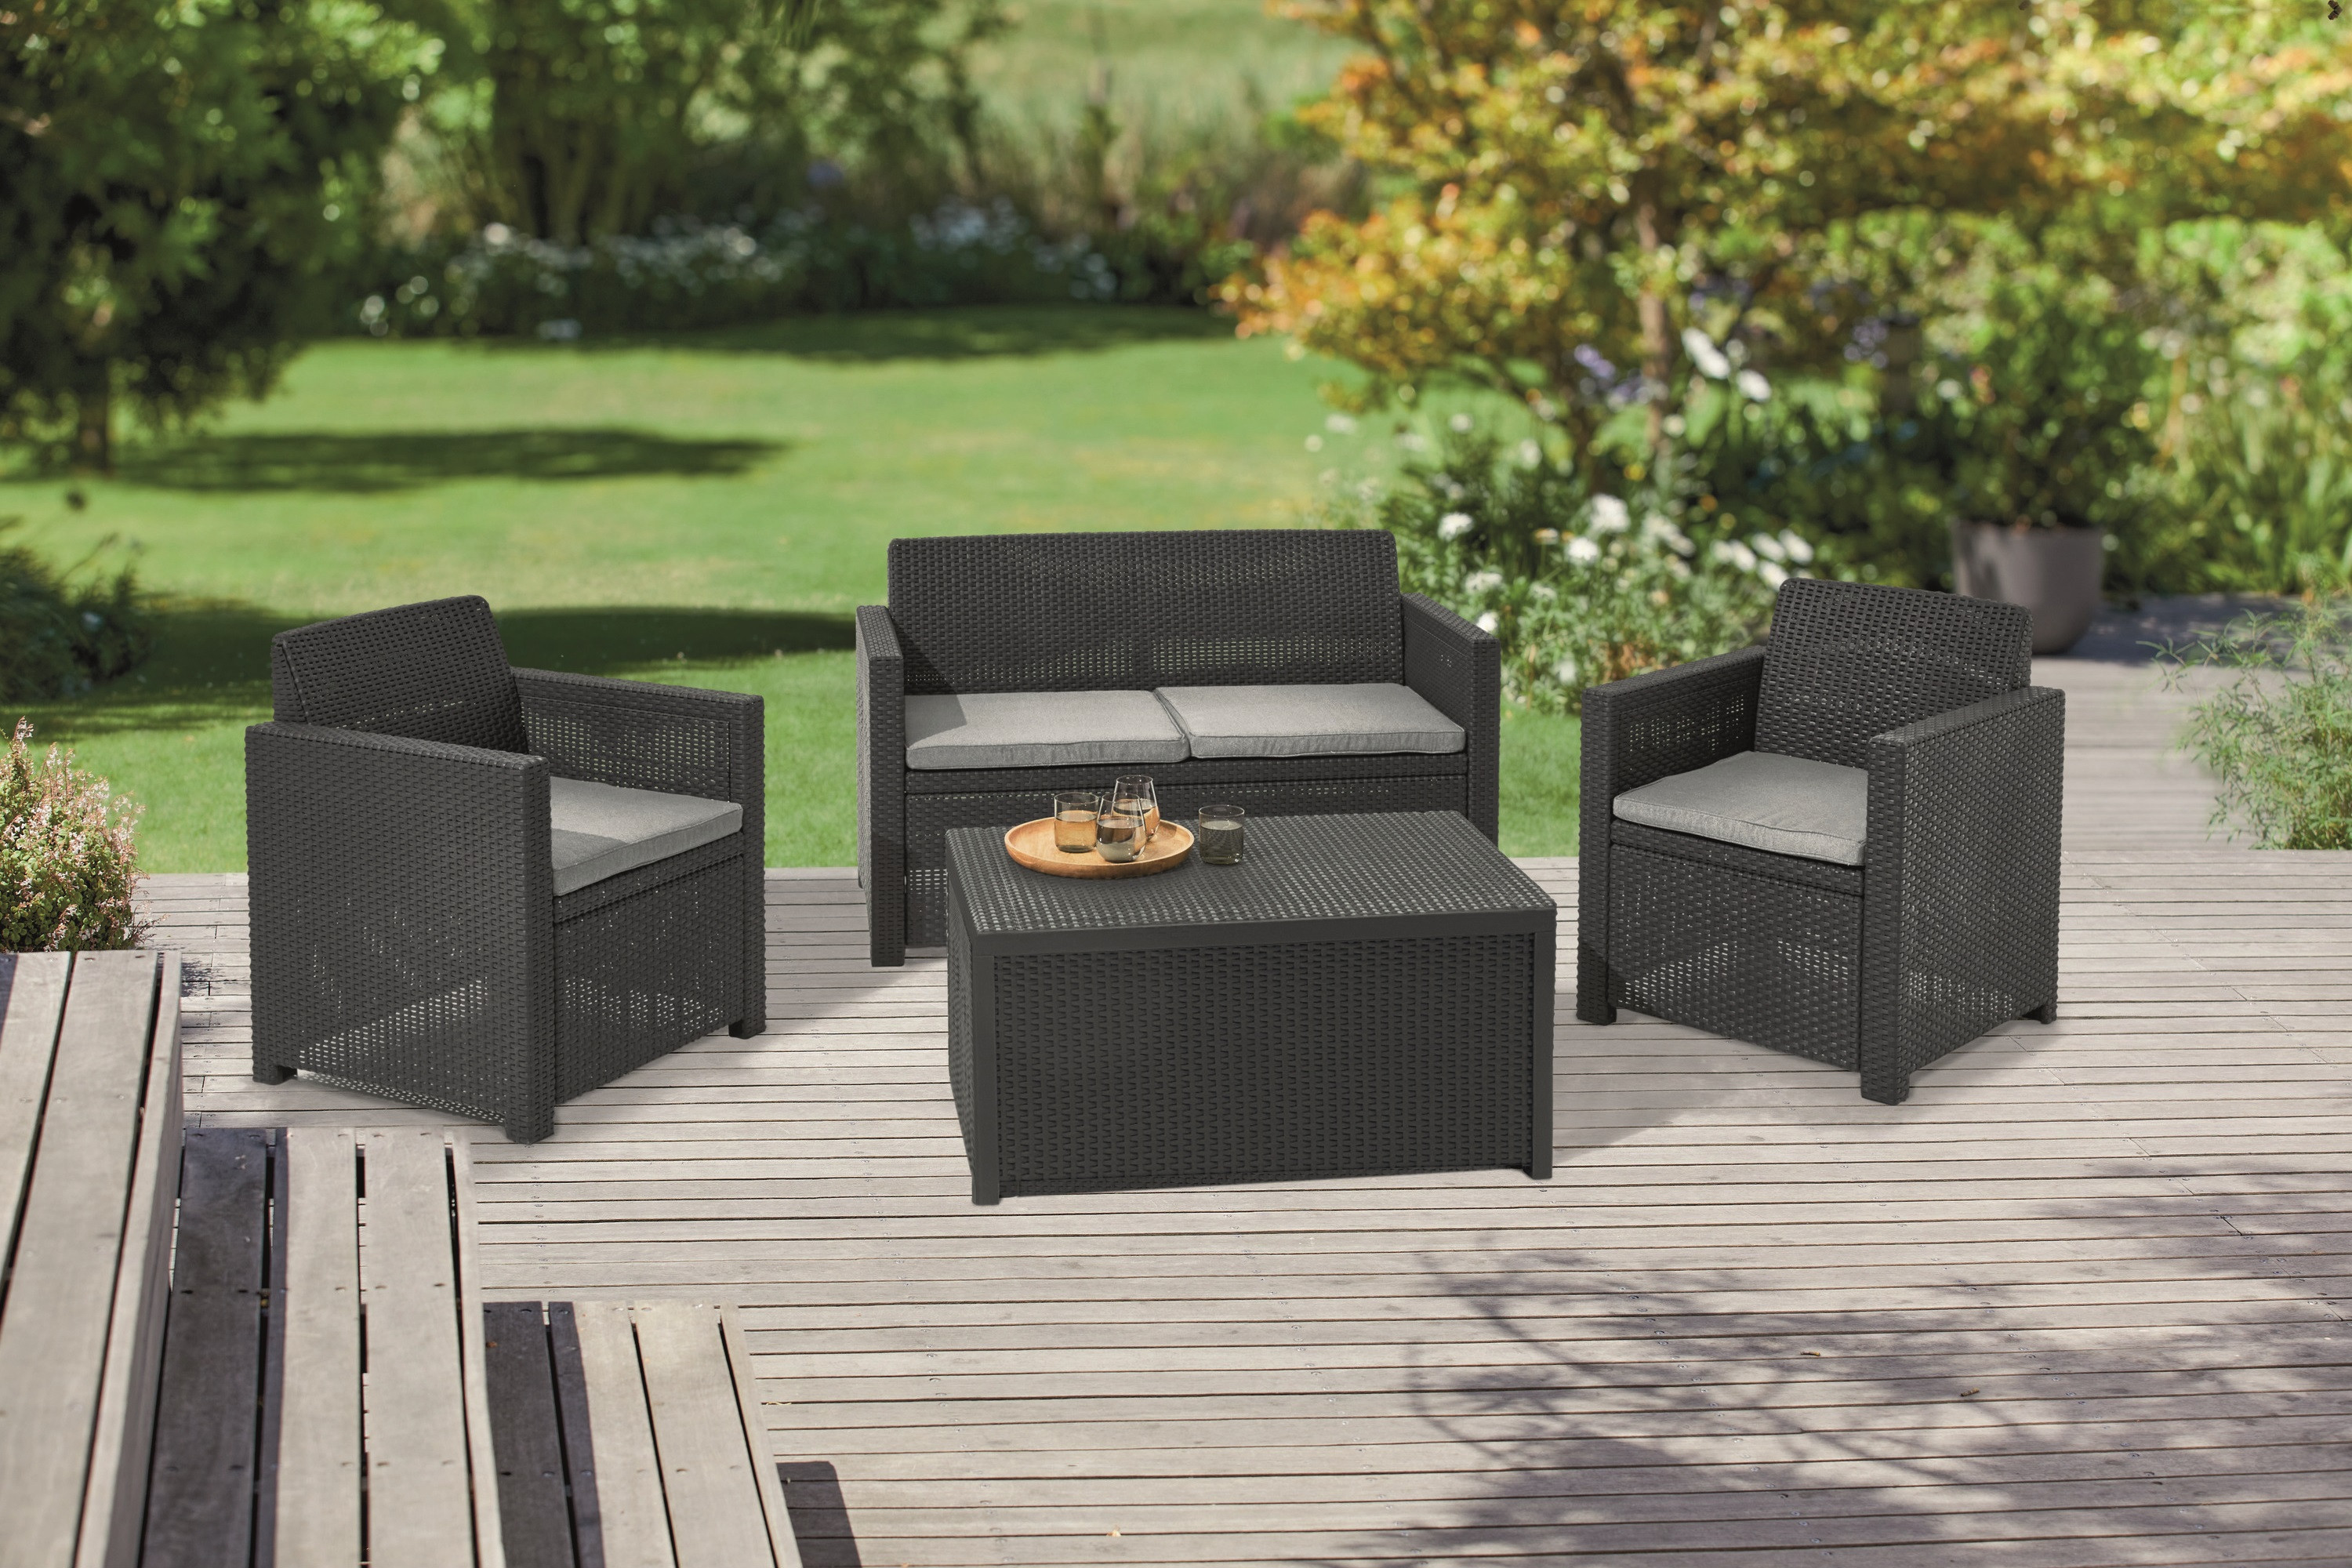 Lidl come to the rescue during garden furniture shortage with £199 rattan set